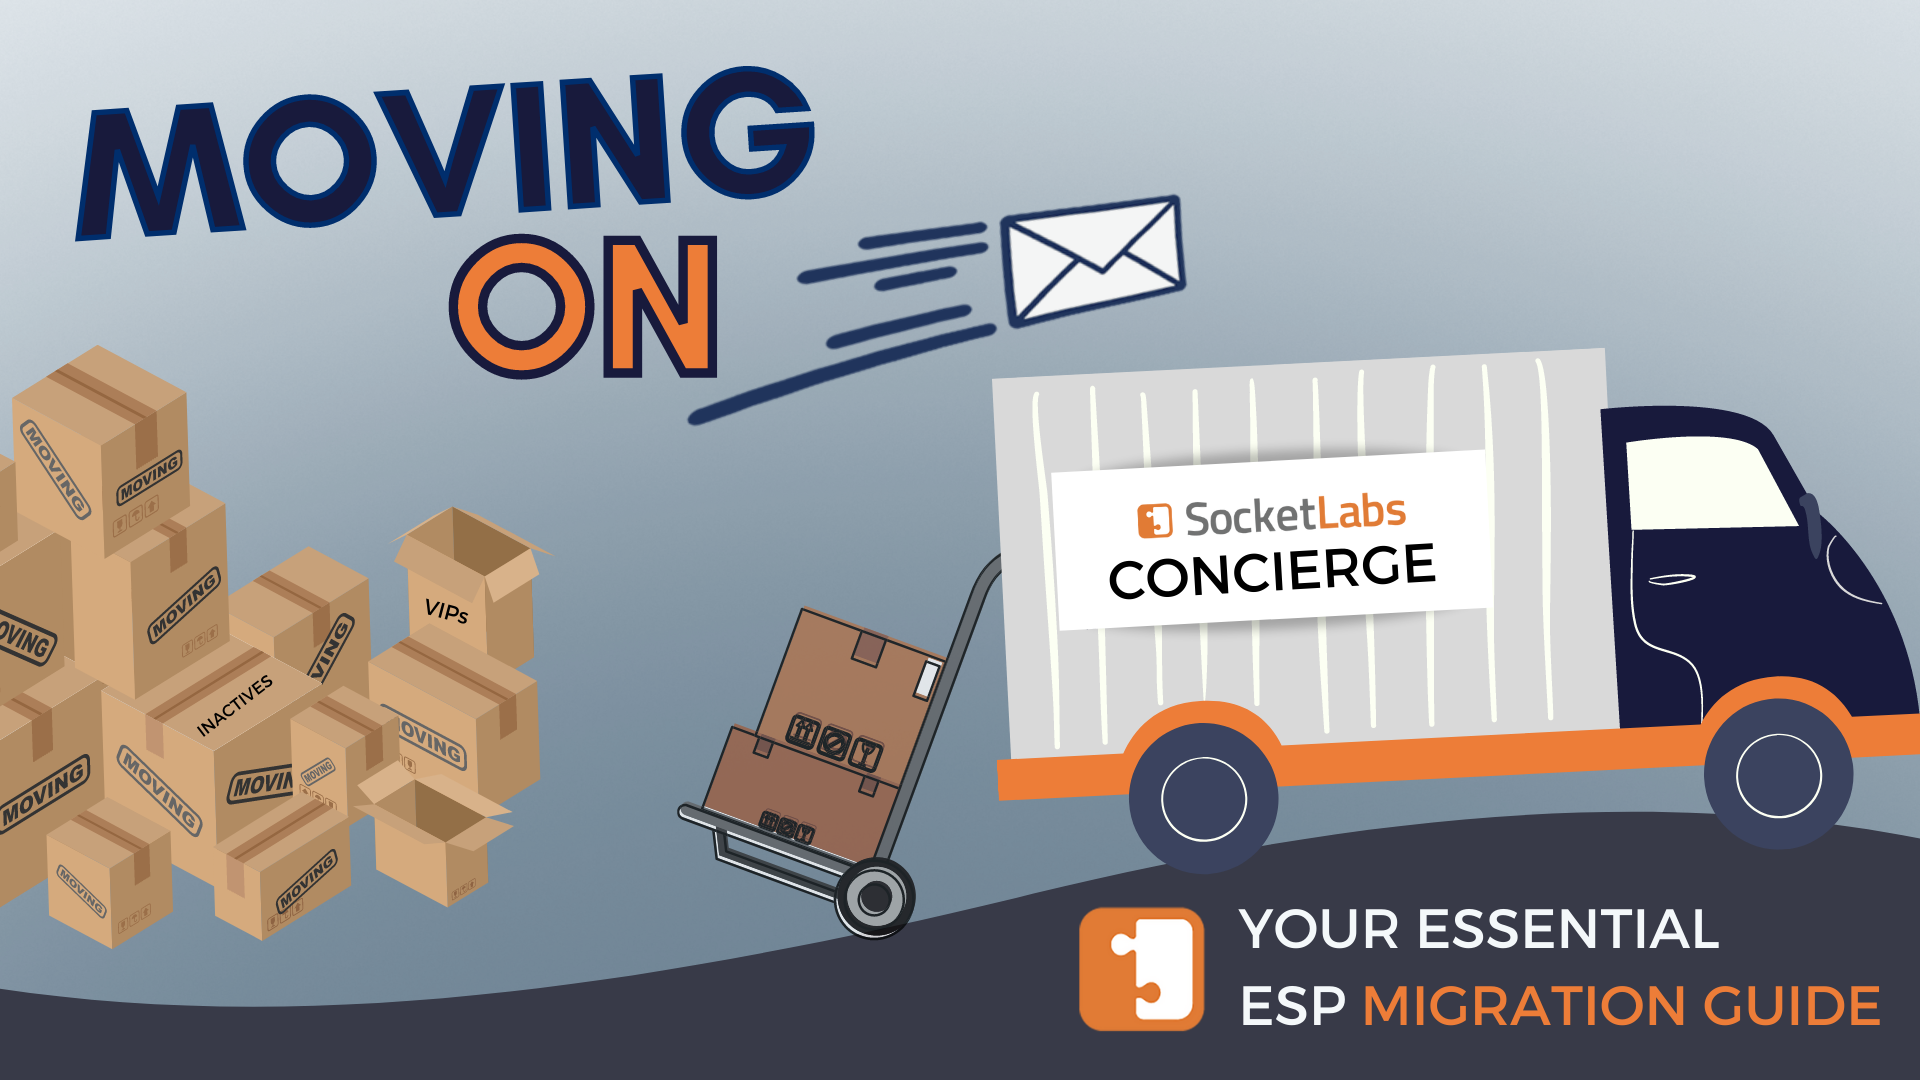 A blog cover with moving boxes and a moving truck, showing someone moving on to a new email delivery provider.